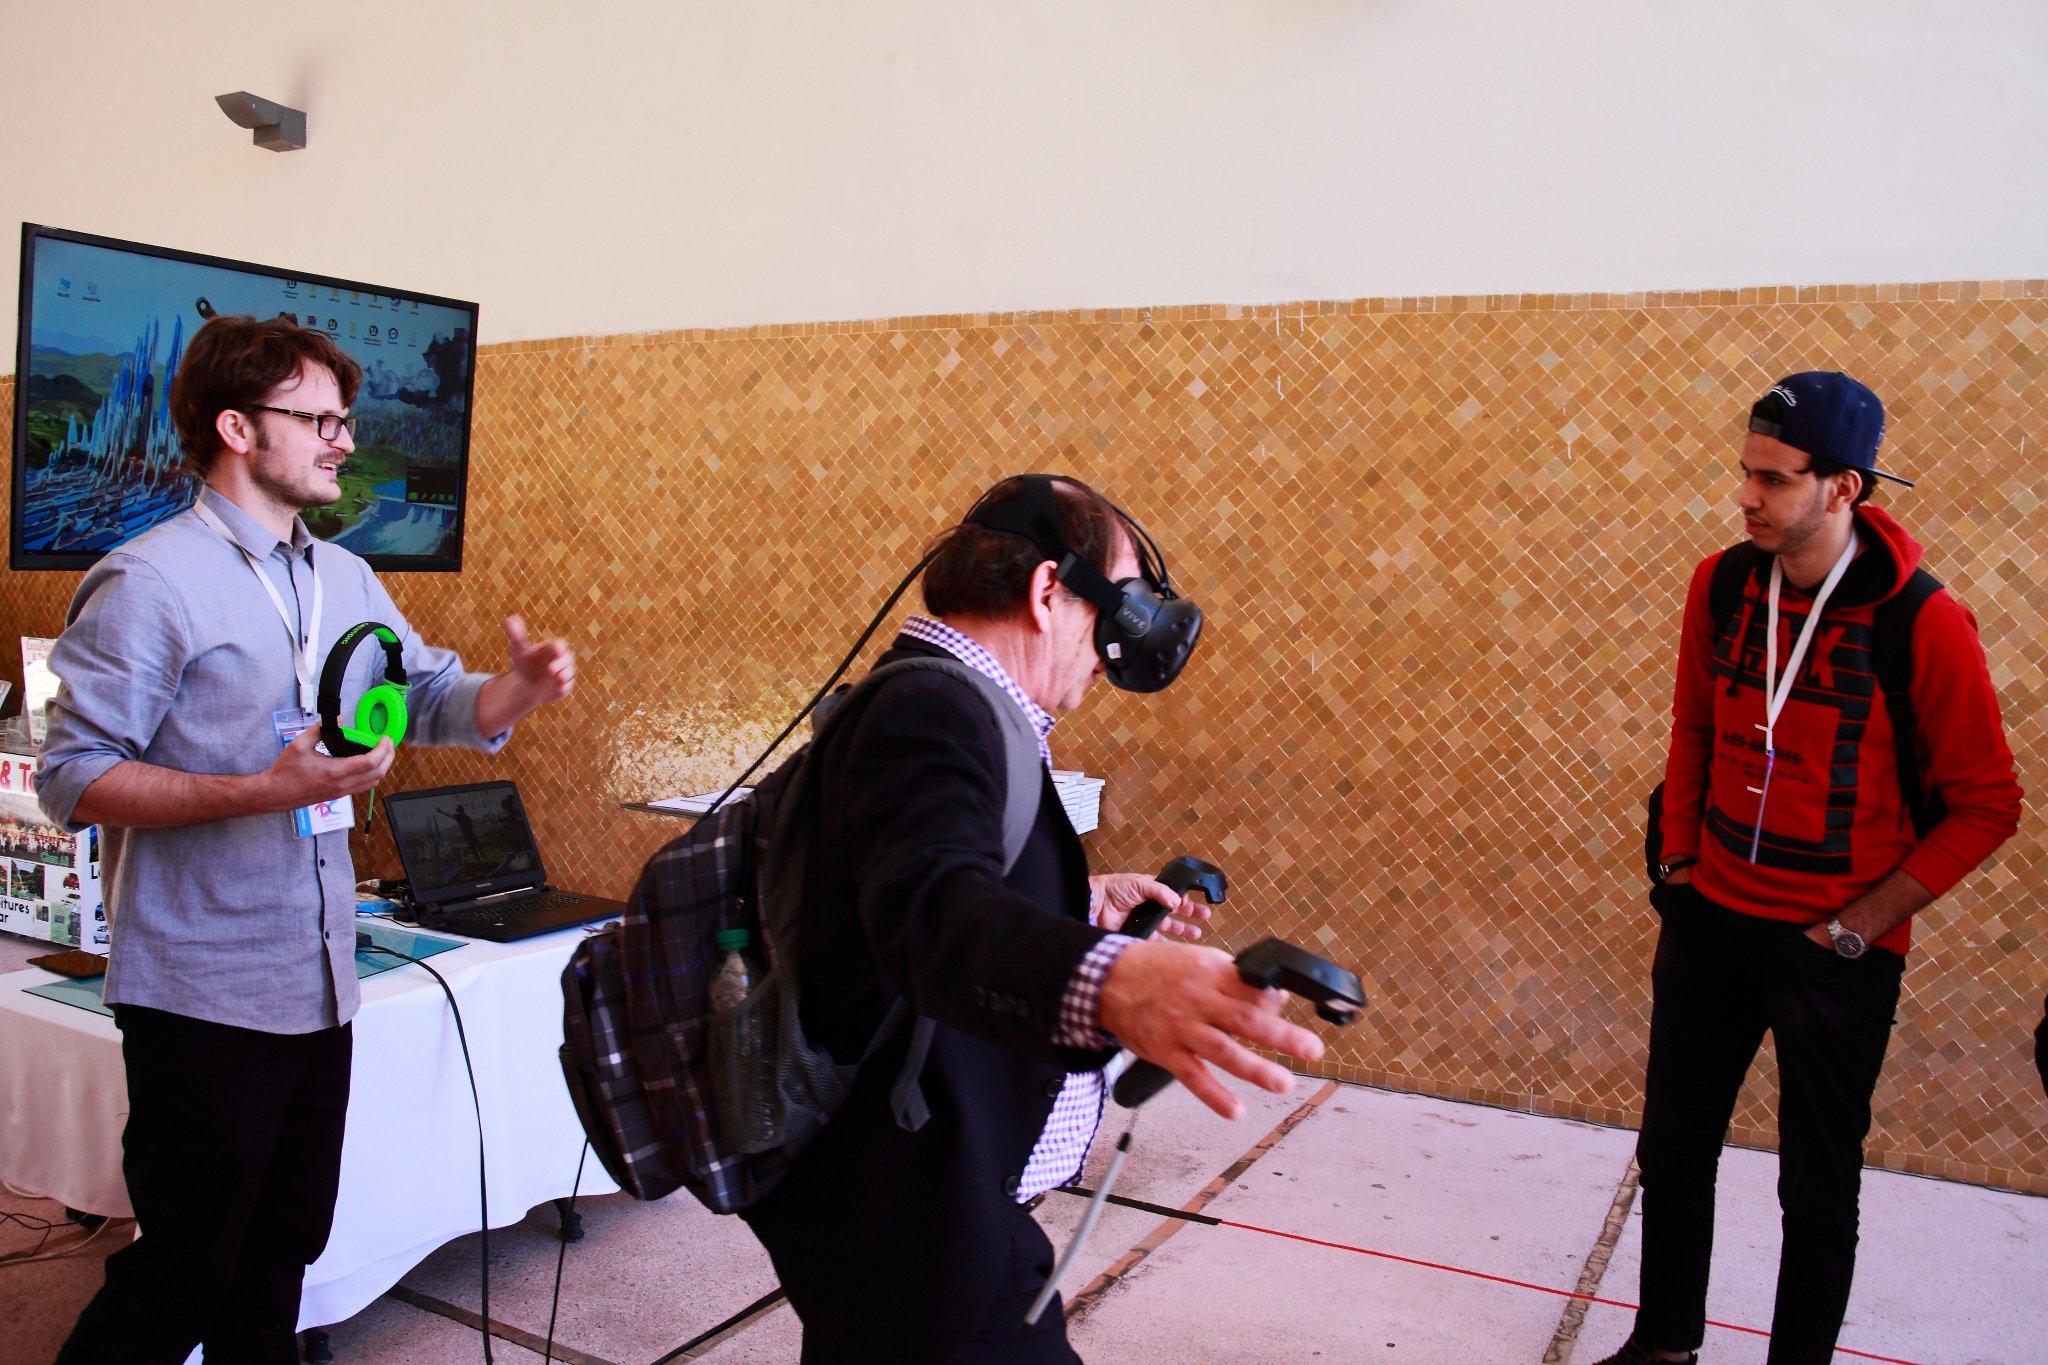 Fly from #Arctic to #Togo with @GFDRR @visyon360 @RCClimate #VirtualReality experience at #DCDays (in Marrakech) - https://t.co/9IXc6yg1qs https://t.co/GVBfPAxkGo